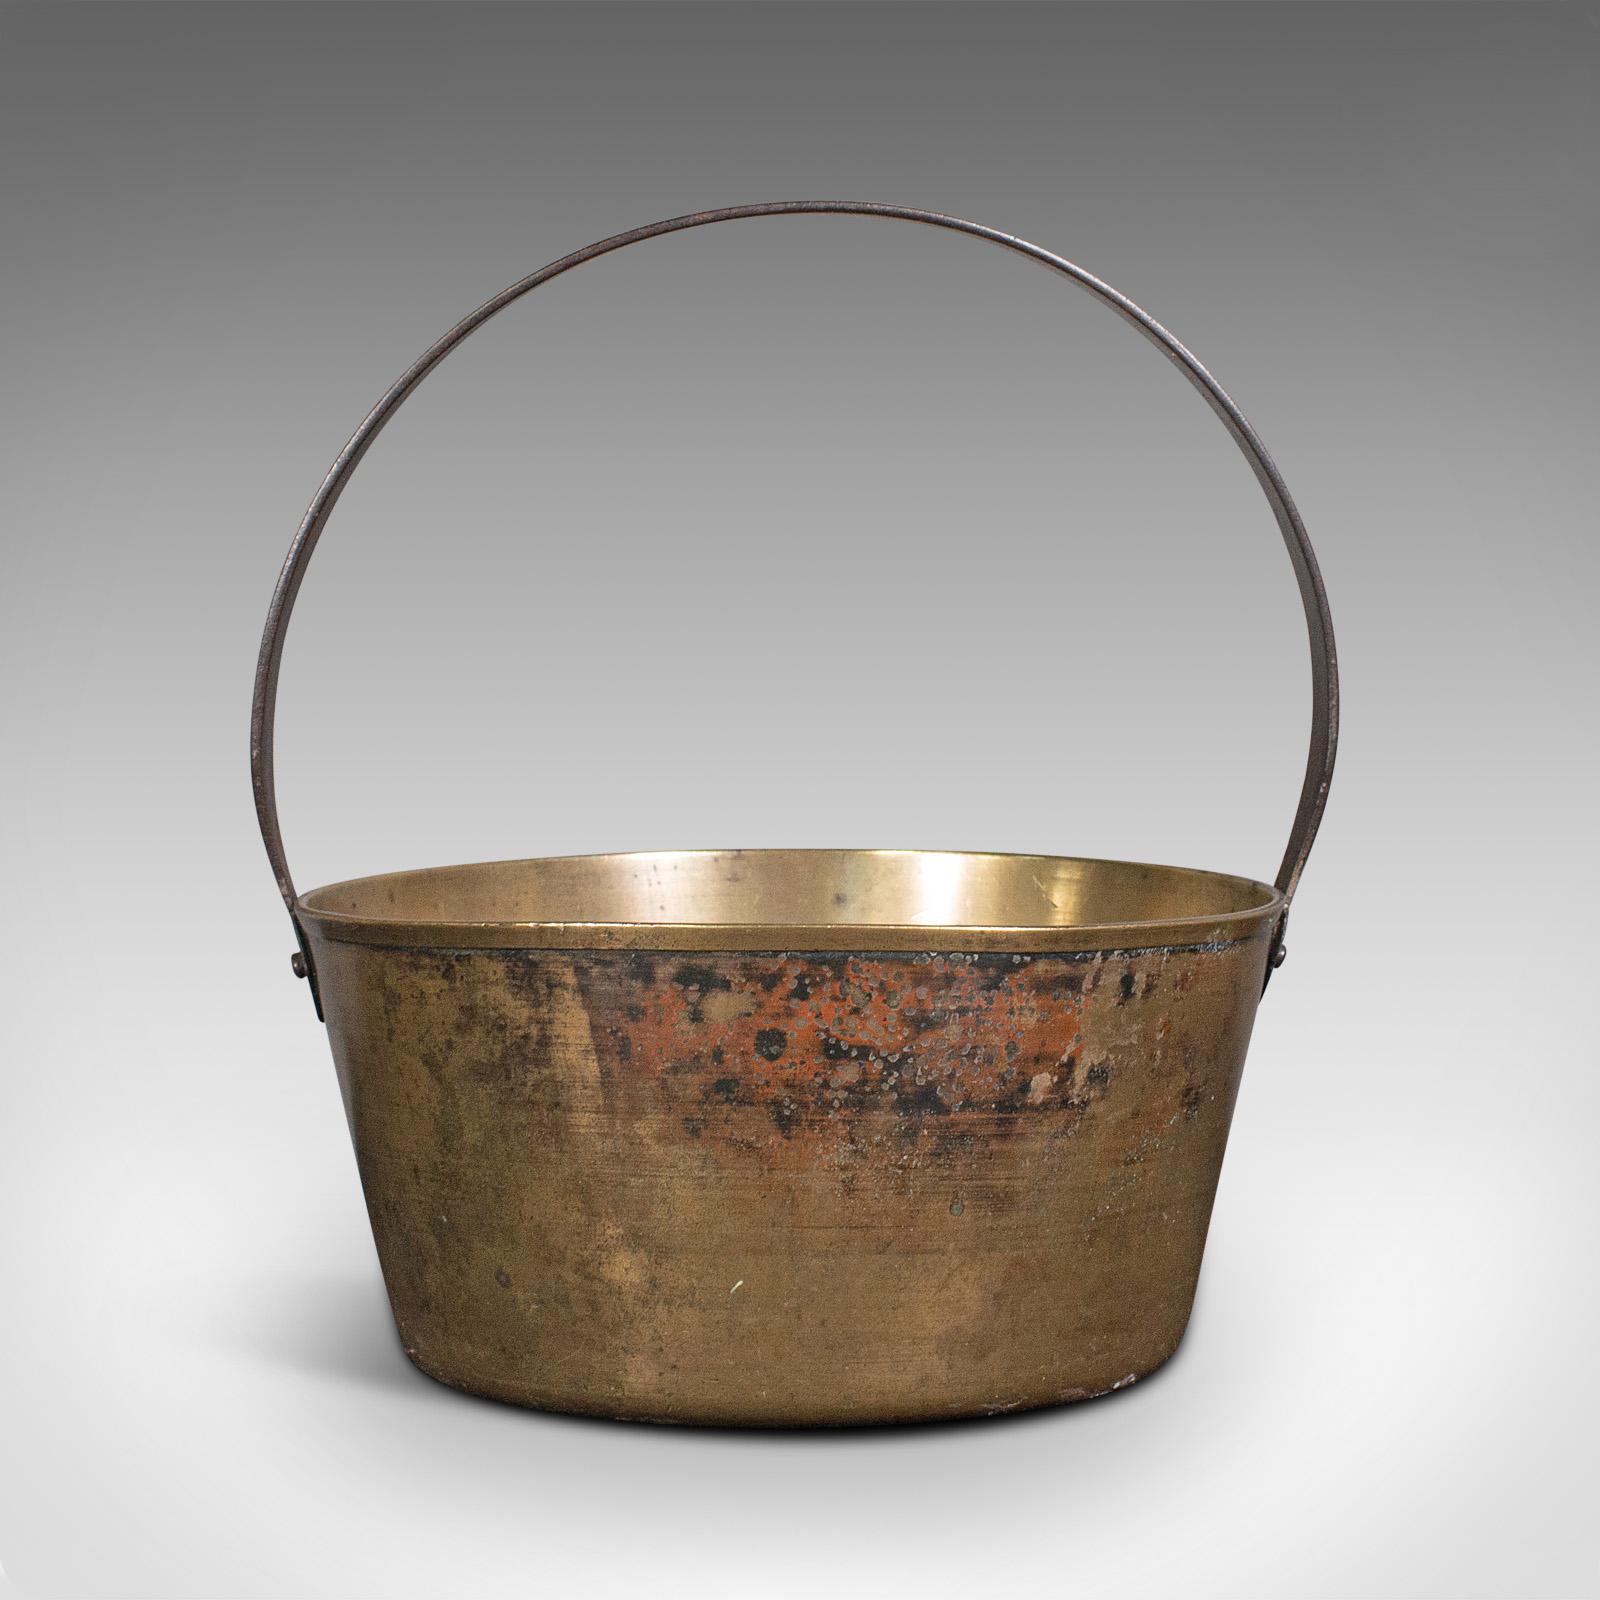 This is an antique preserving pan. An English, bronze jam cooking pot, dating to the late Georgian period, circa 1800.

Pleasingly weathered Georgian pan
Displaying a desirable aged patina throughout
Bronze presents weathering commensurate with